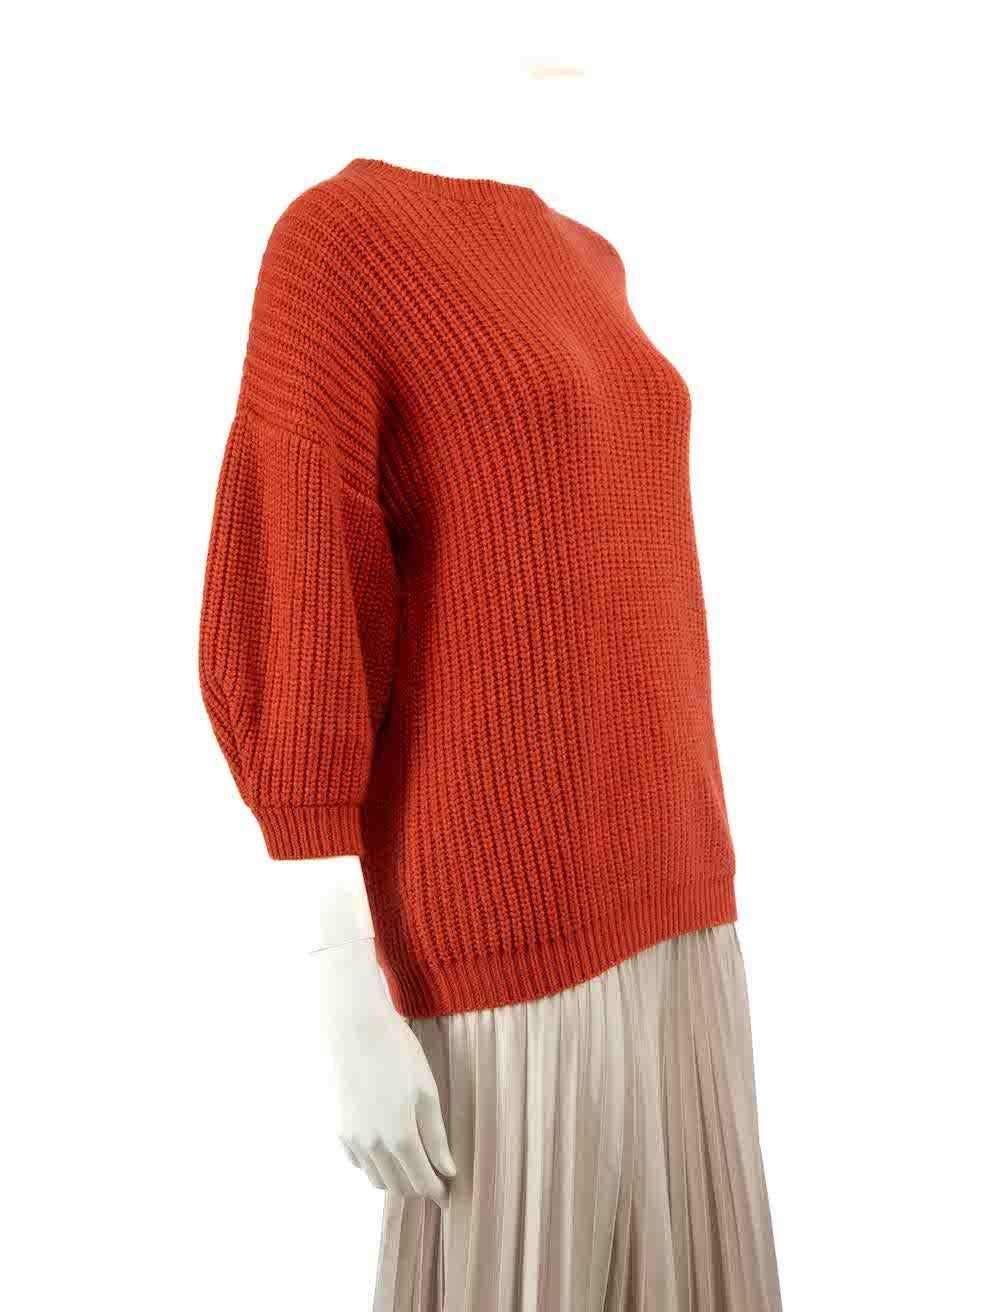 CONDITION is Very good. Hardly any visible wear to jumper is evident on this used Brunello Cucinelli designer resale item.
 
 
 
 Details
 
 
 Orange
 
 Cashmere
 
 Mid sleeves top
 
 Knitted and stretchy
 
 Round neckline
 
 
 
 
 
 Made in Italy
